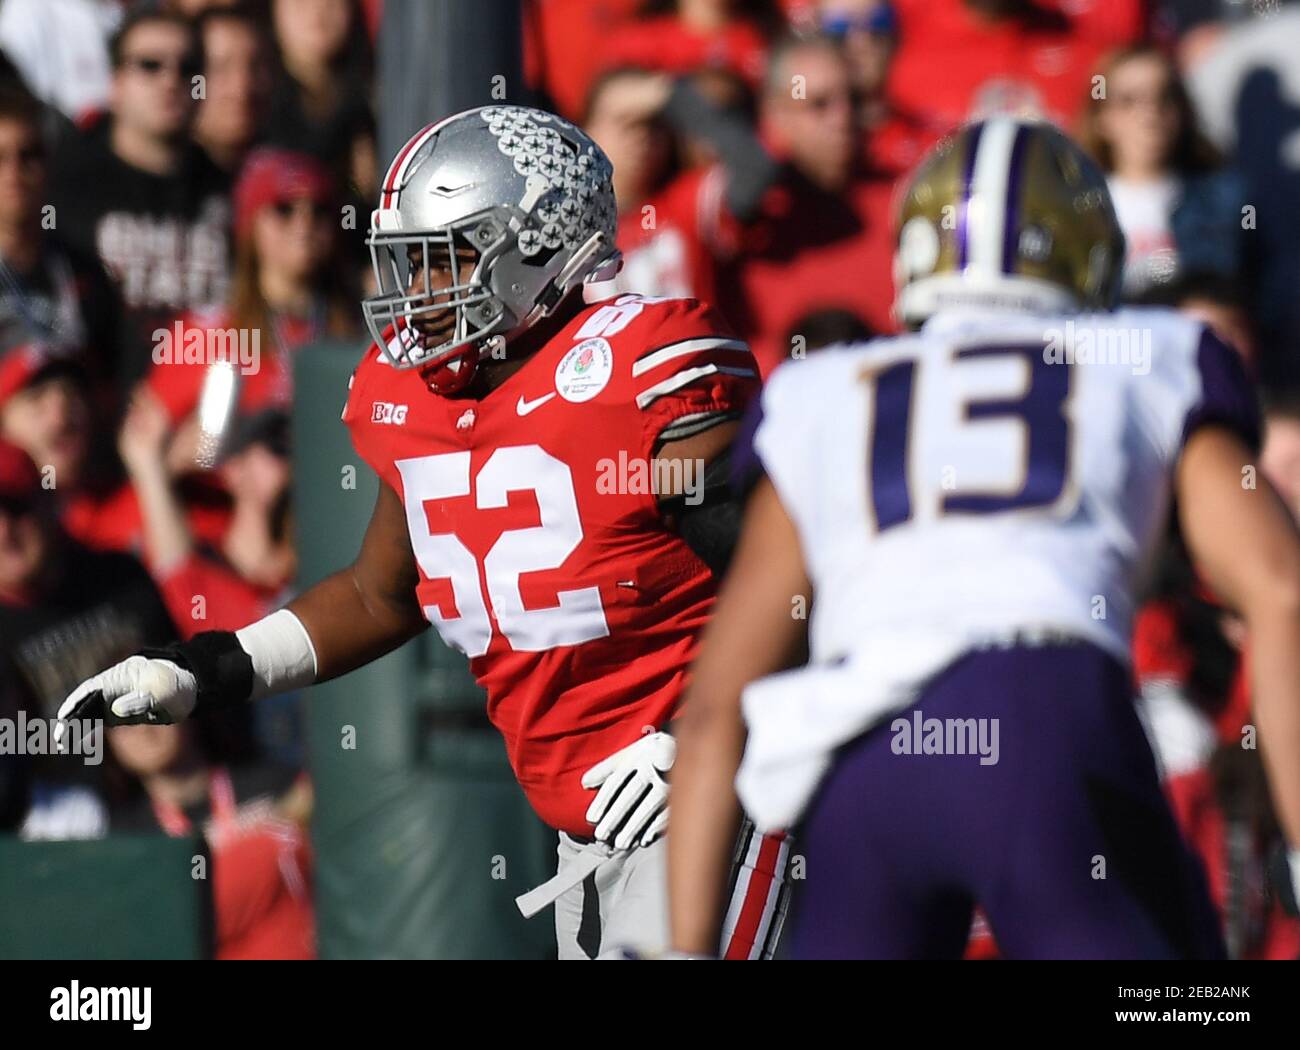 (FILE PHOTOS).former Ohio State Buckeyes (52) Wyatt Davis is projected to go in the 1st or 2nd Round of the 2021 NFL Draft, here he is pictured on January 1, 2019 versus the Washington Huskies, the NFL Draft will be held in Cleveland, Ohio on April 29, 2021.(Mandatory Credit: Jose/MarinMedia.org/Cal Sport Media) (Absolute Complete photographer, and credits required) Stock Photo